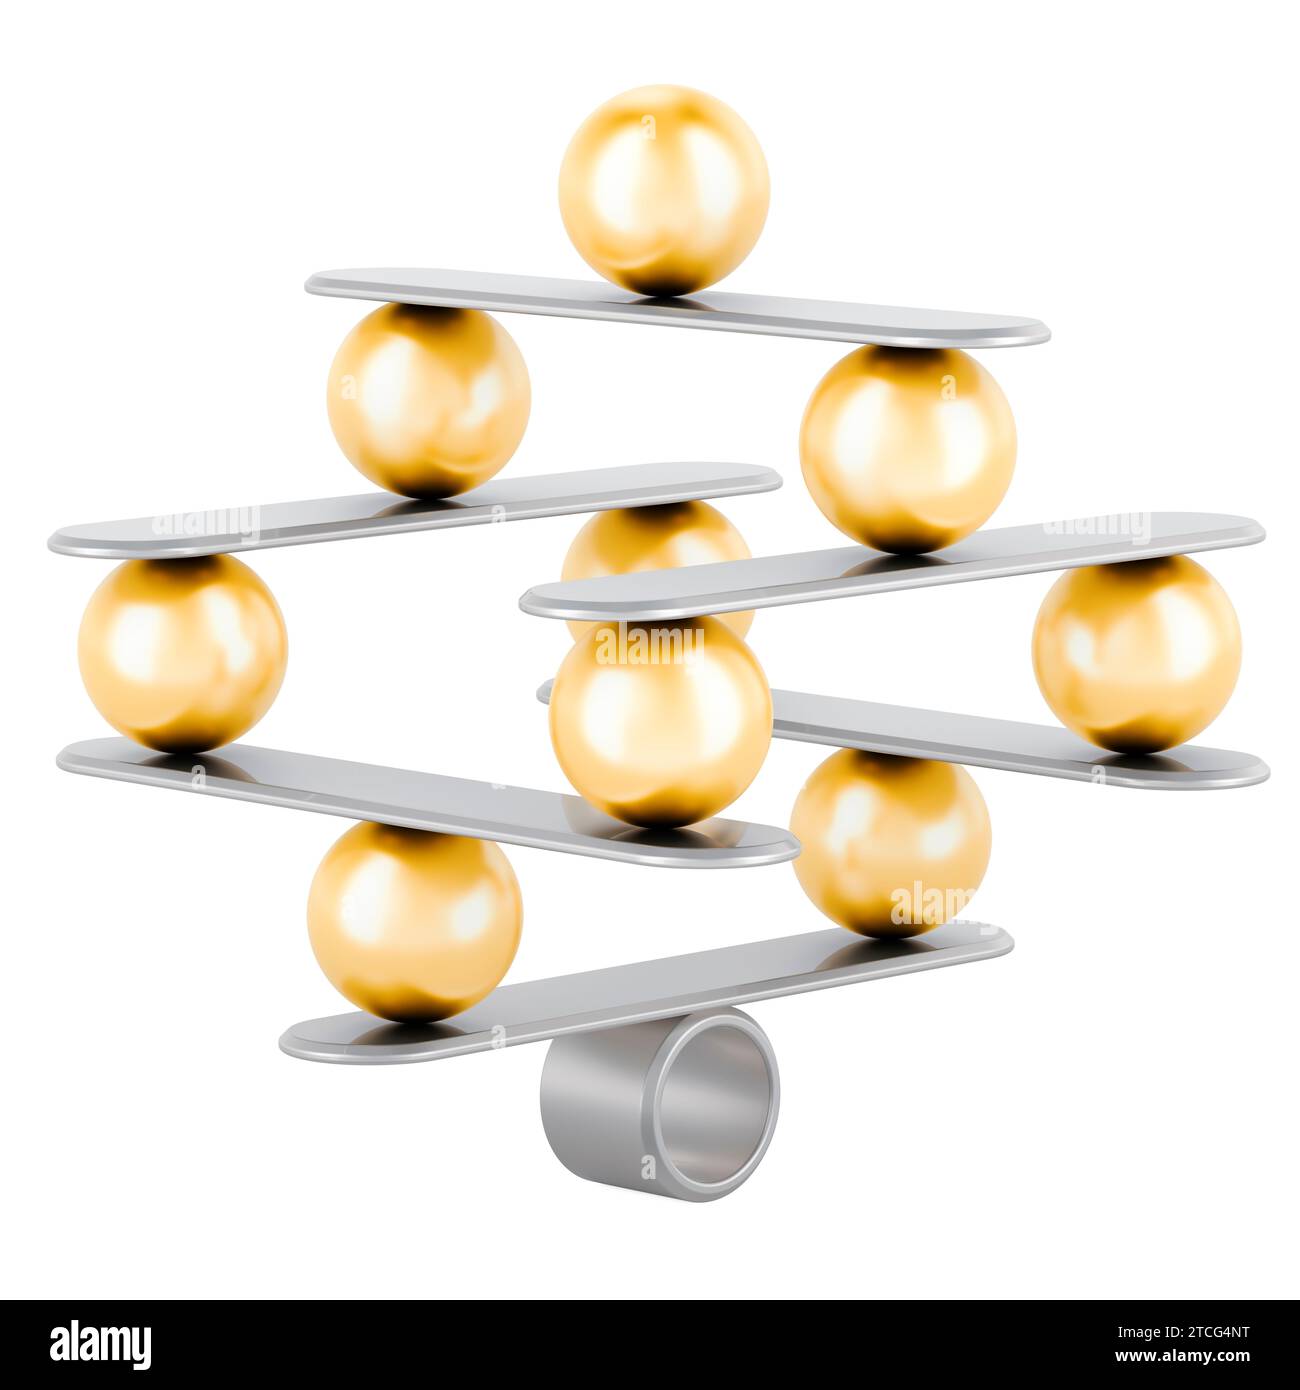 Balance concept from metallic balls, 3D rendering isolated on white background Stock Photo